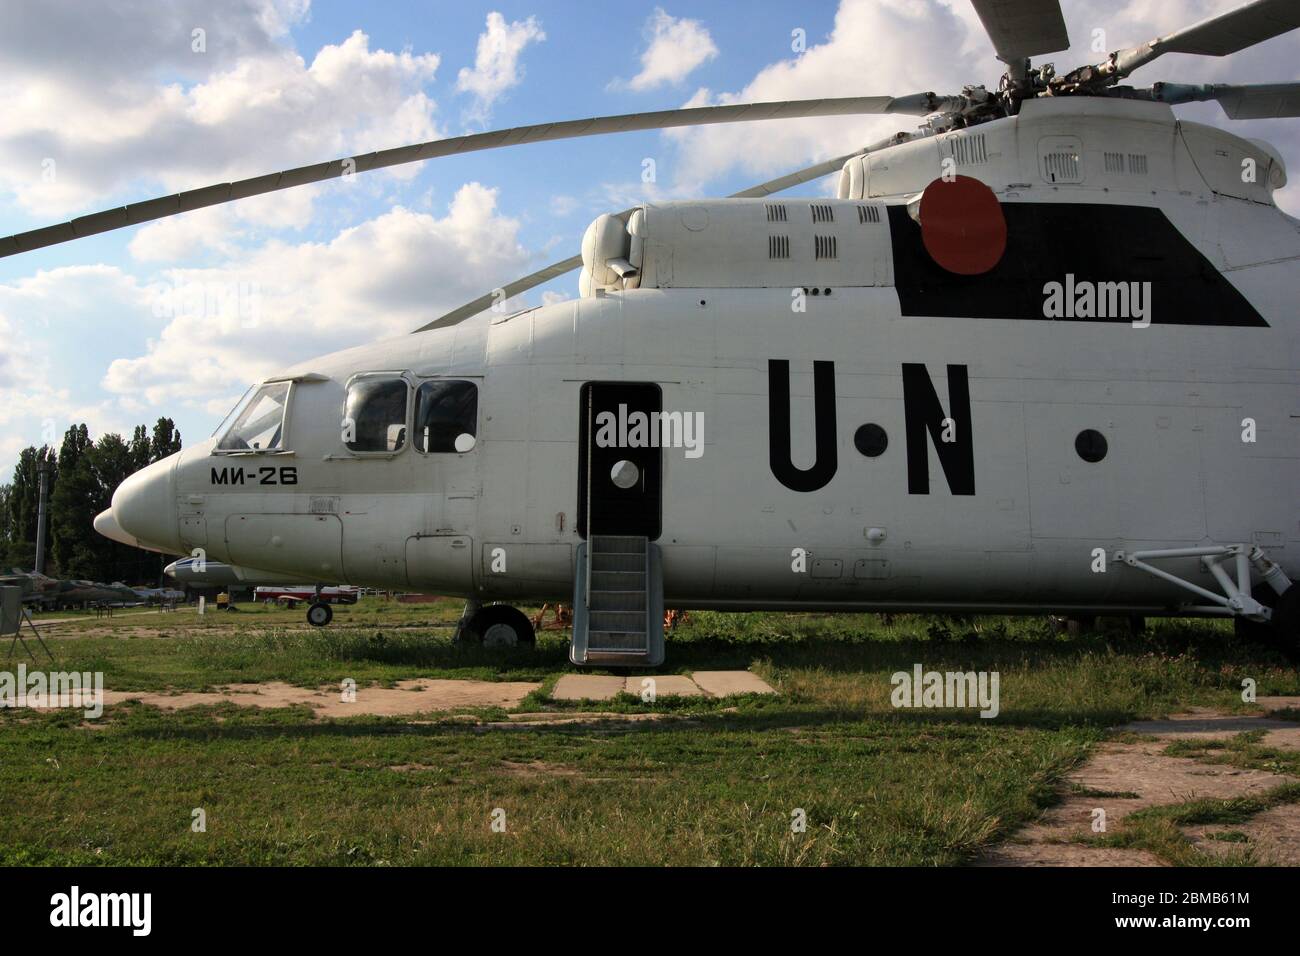 Exterior view of a Mil Mi-26 'Halo' super heavy-lift helicopter with United Nations livery painting at the Zhulyany State Aviation Museum of Ukraine Stock Photo